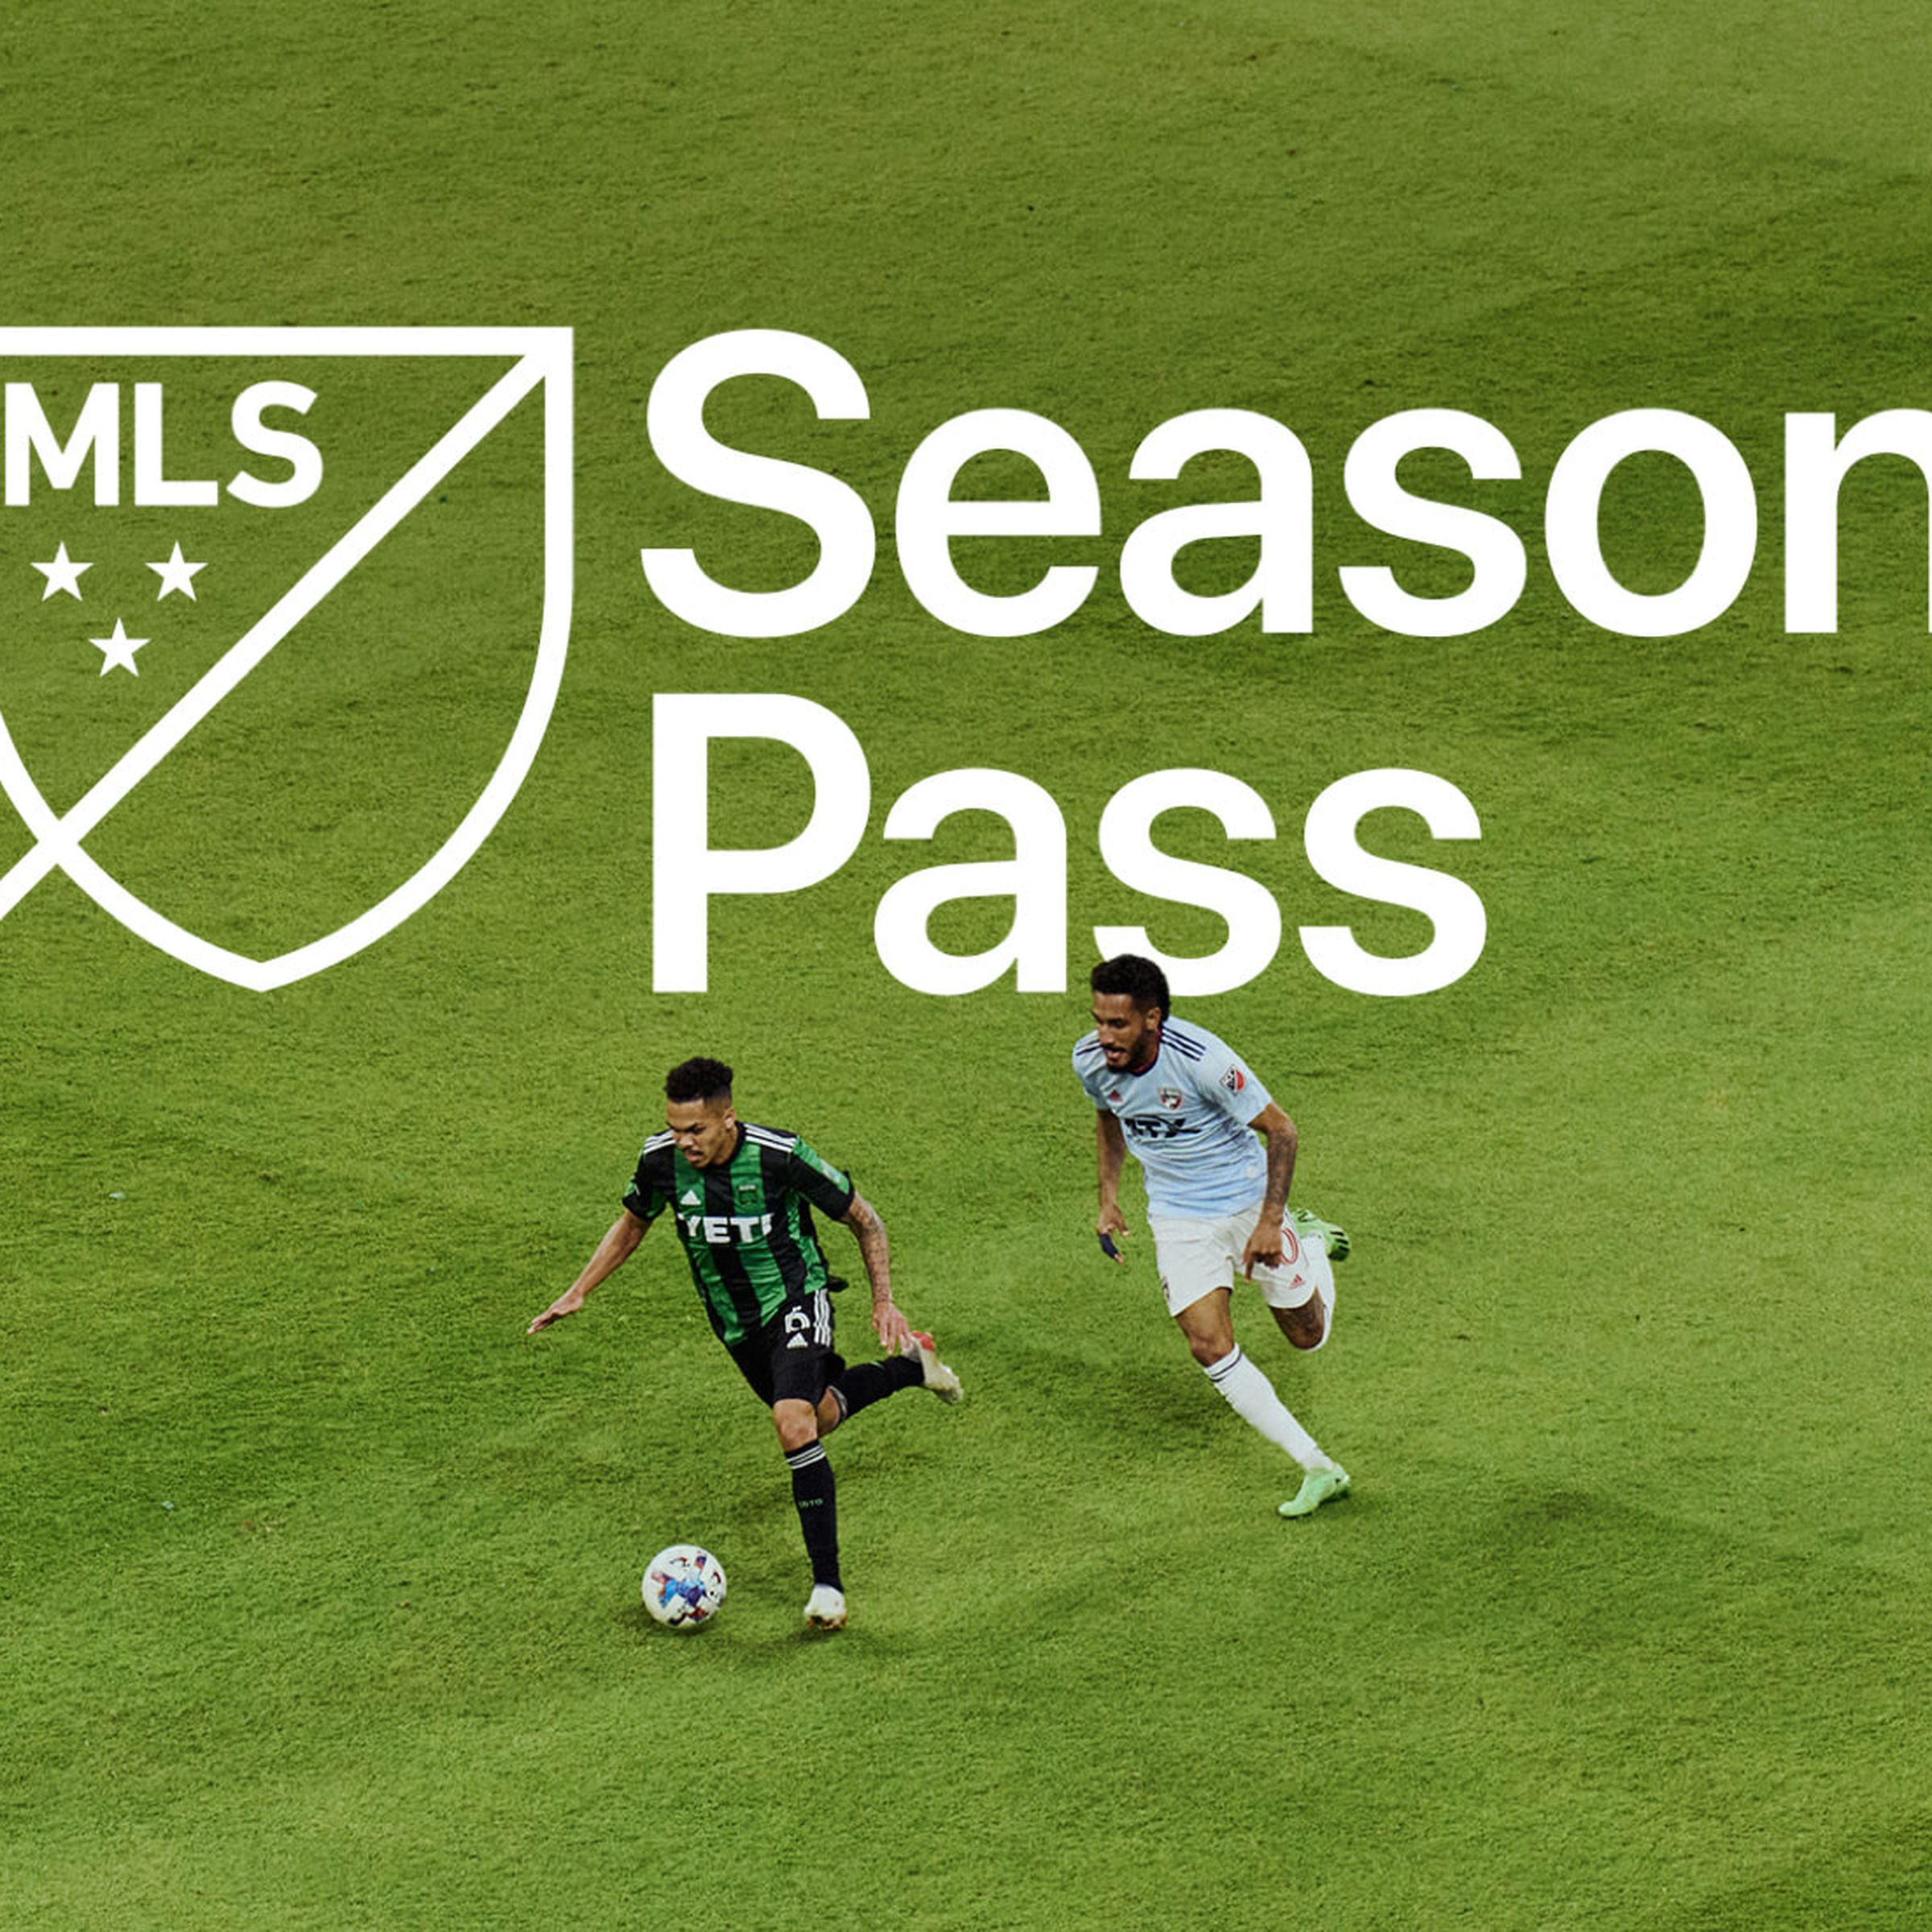 An image showing Apple’s MLS season pass logo with a soccer field in the background